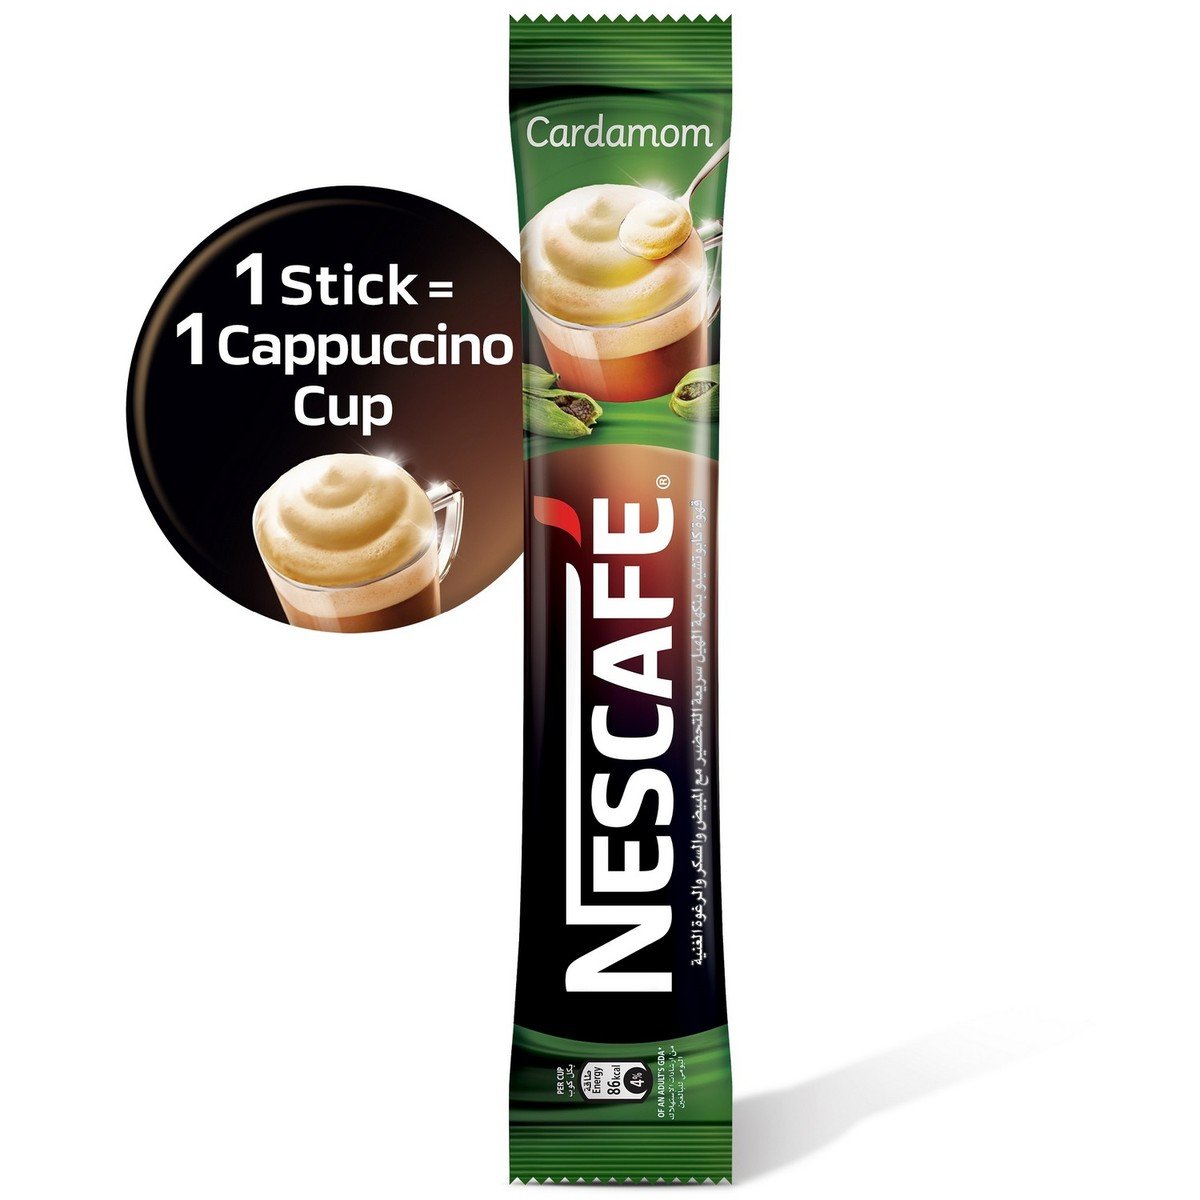 Nescafe Cappuccino With Cardamom Foaming Mix Coffee 18.7g Sachet X 10 Pieces